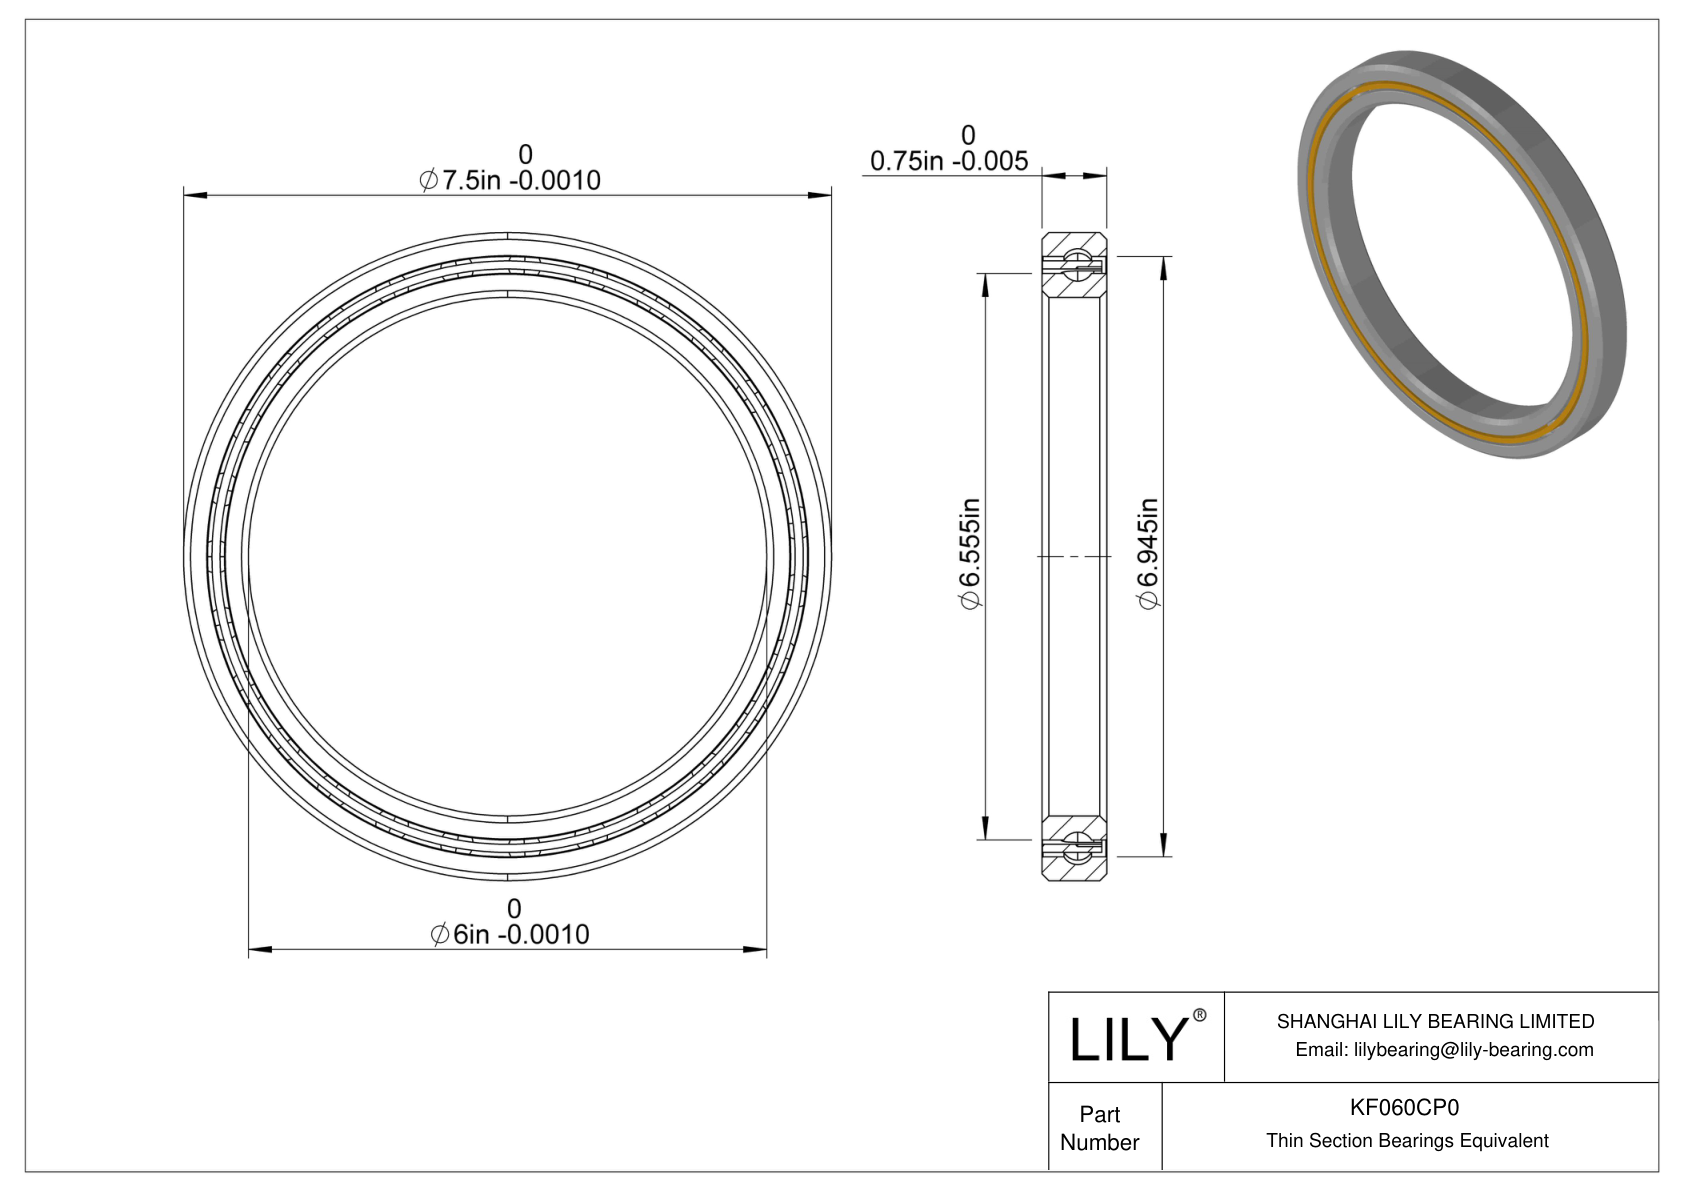 KF060CP0 Constant Section (CS) Bearings cad drawing